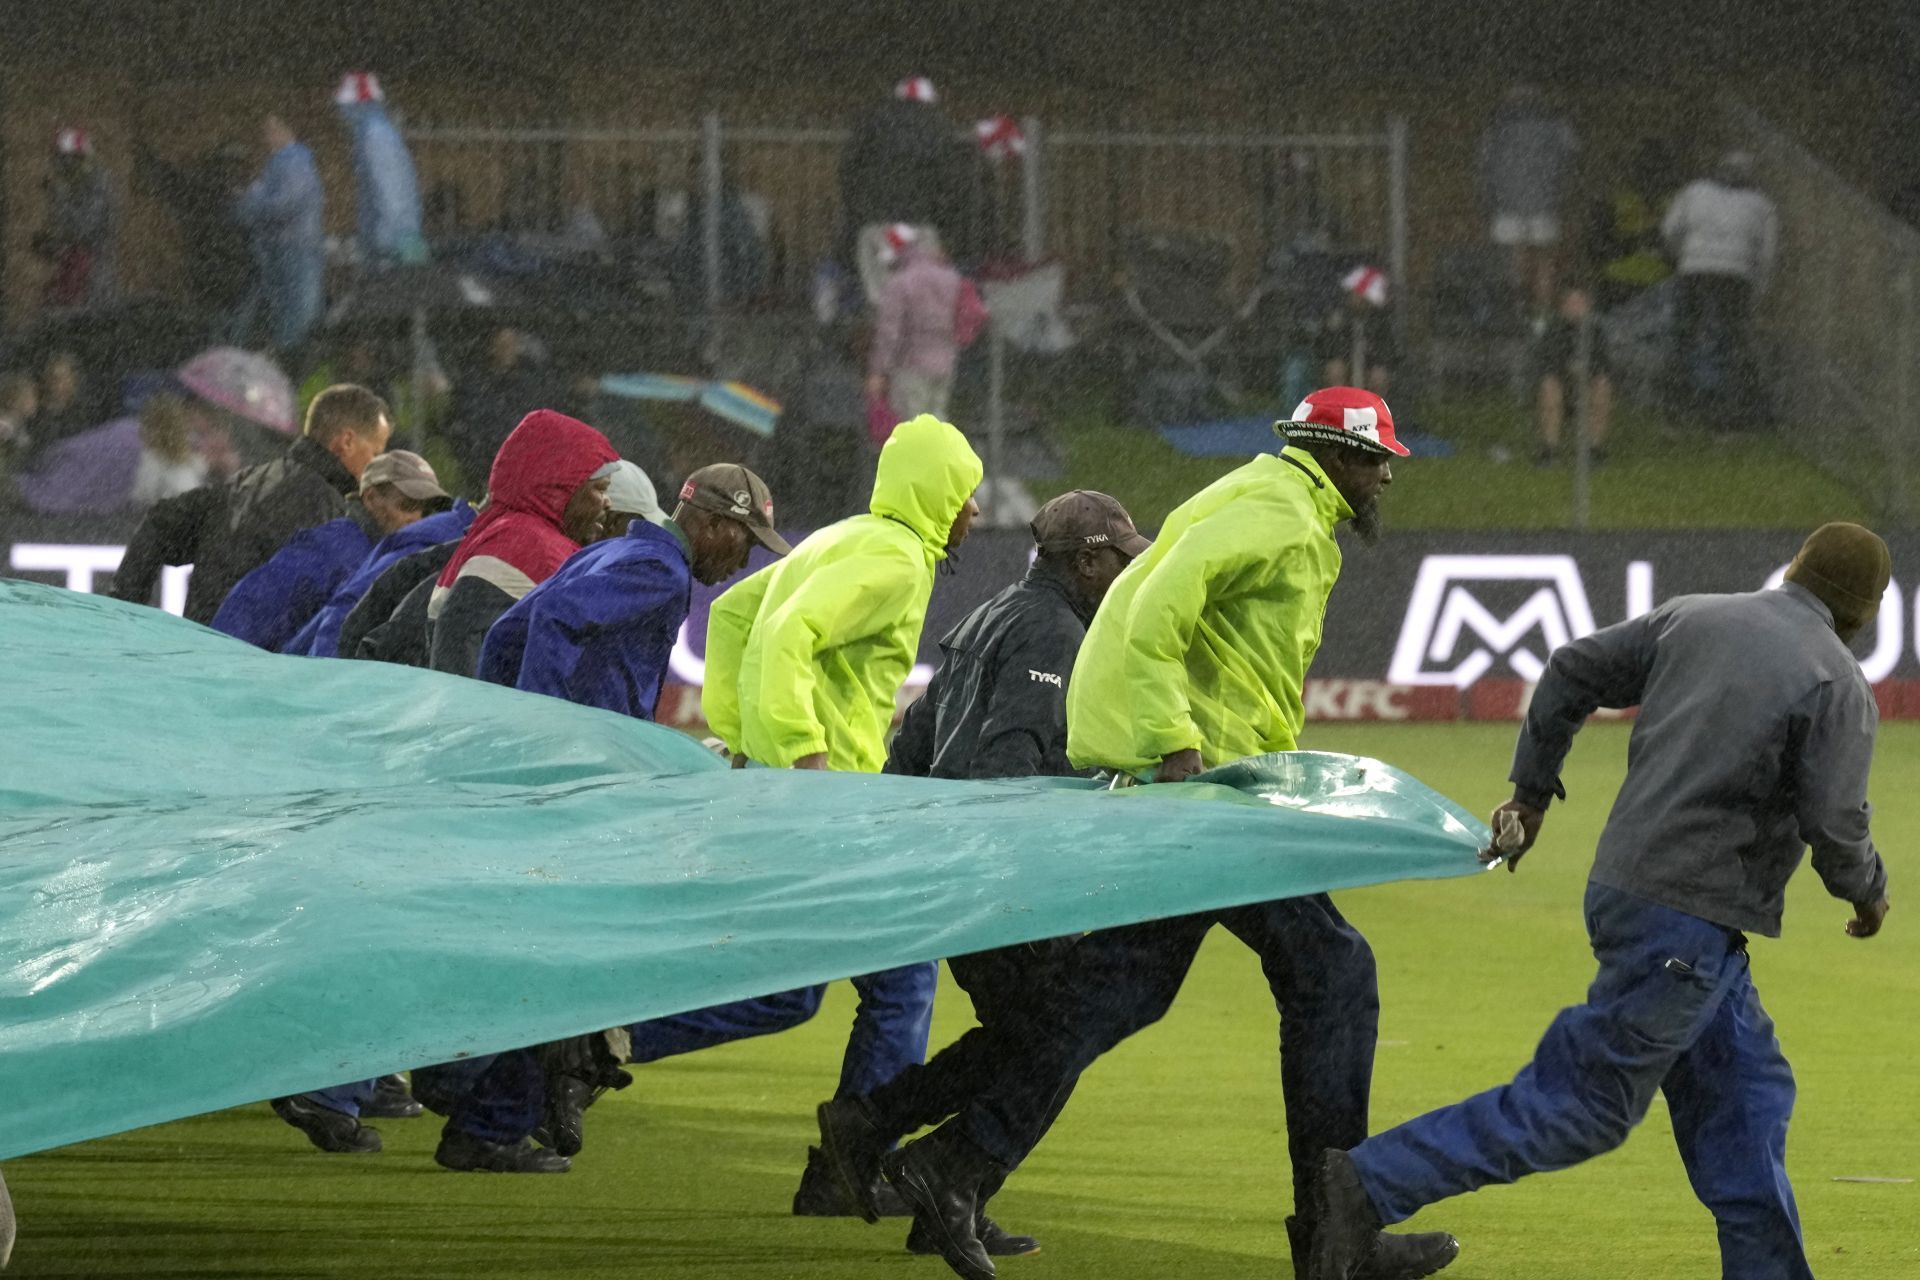 Rain hampered the Men in Blue&rsquo;s chances in Gqeberha. (Pic: AP)